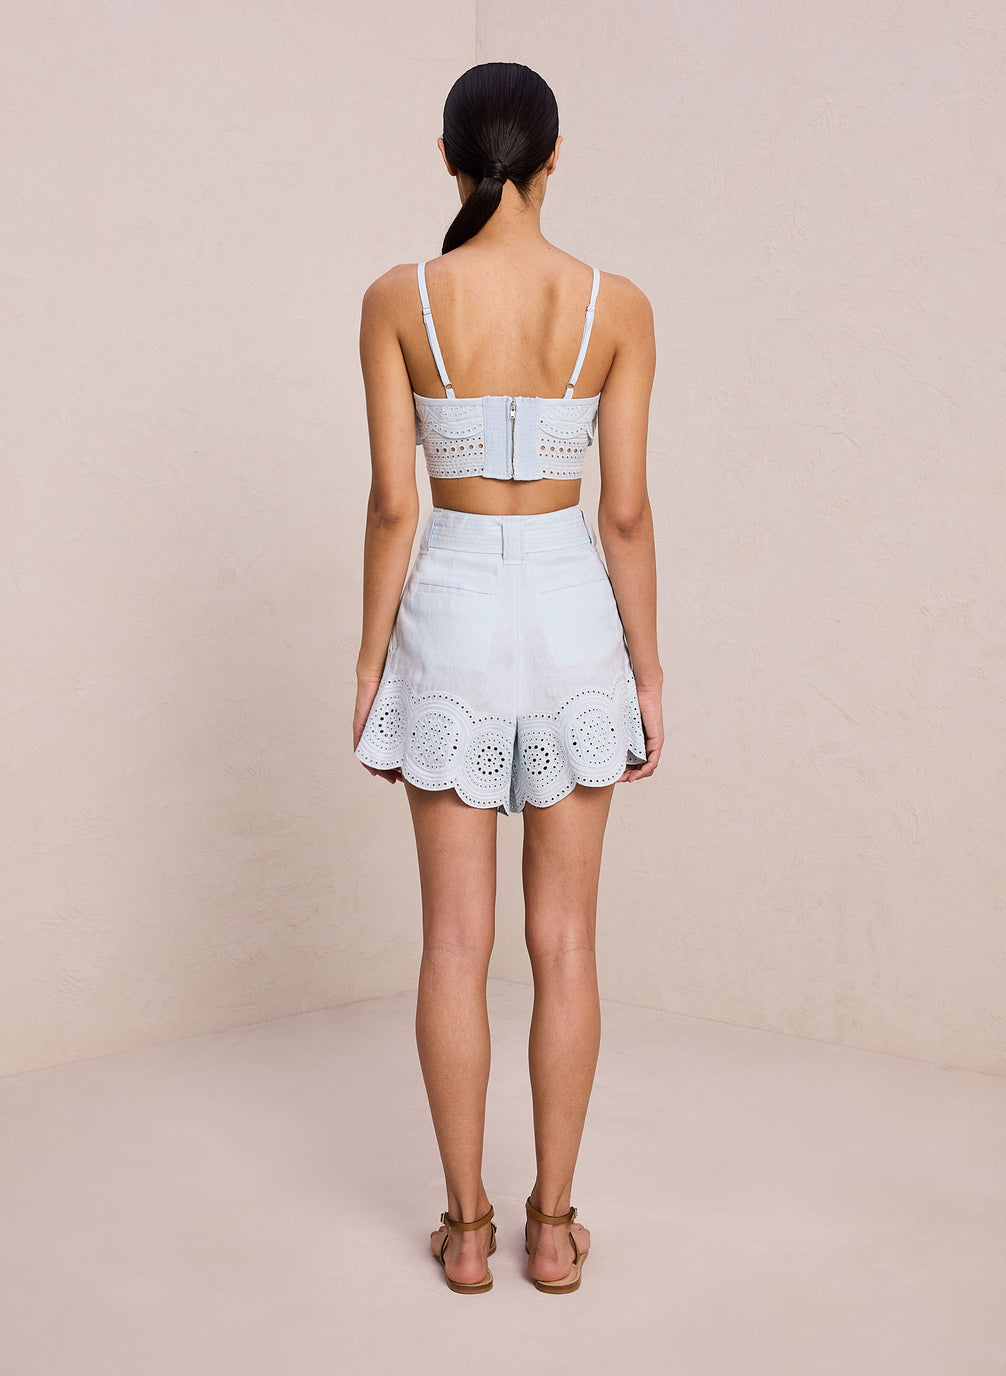 back view of woman wearing light blue eyelet crop tank and coordinating short